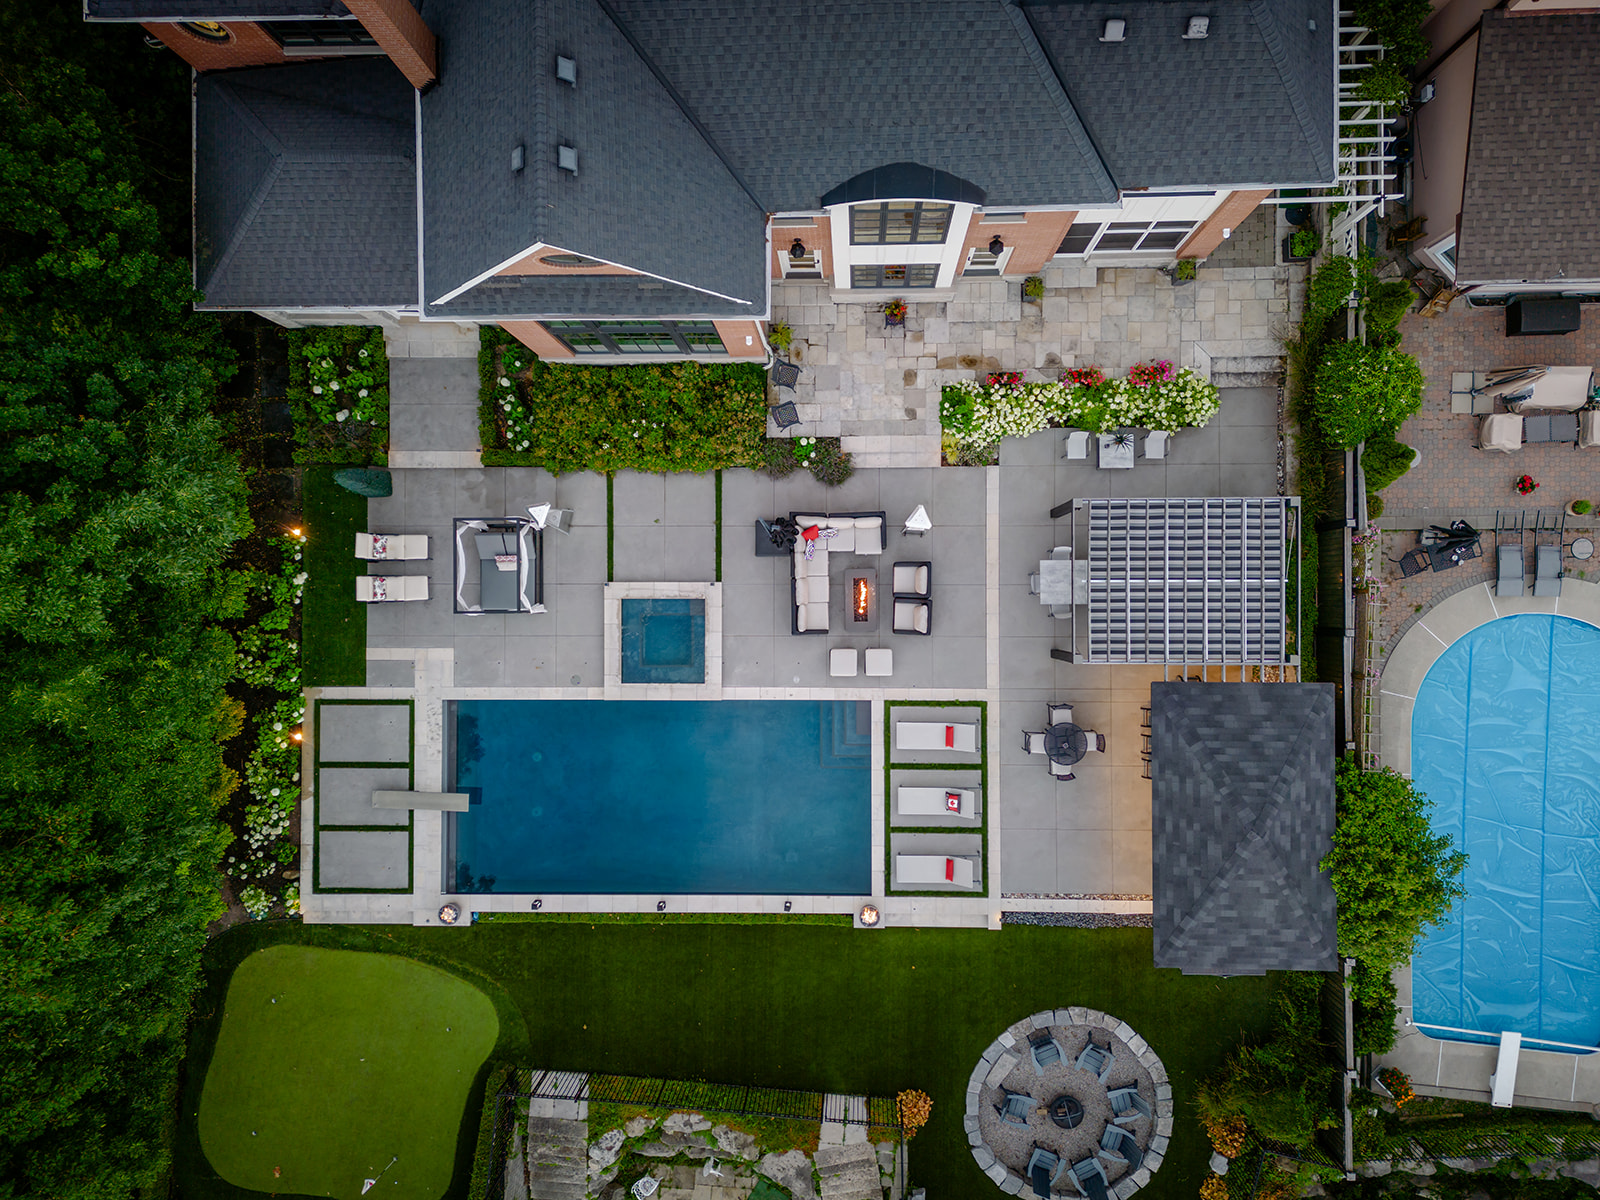 Top-down view of the backyard.